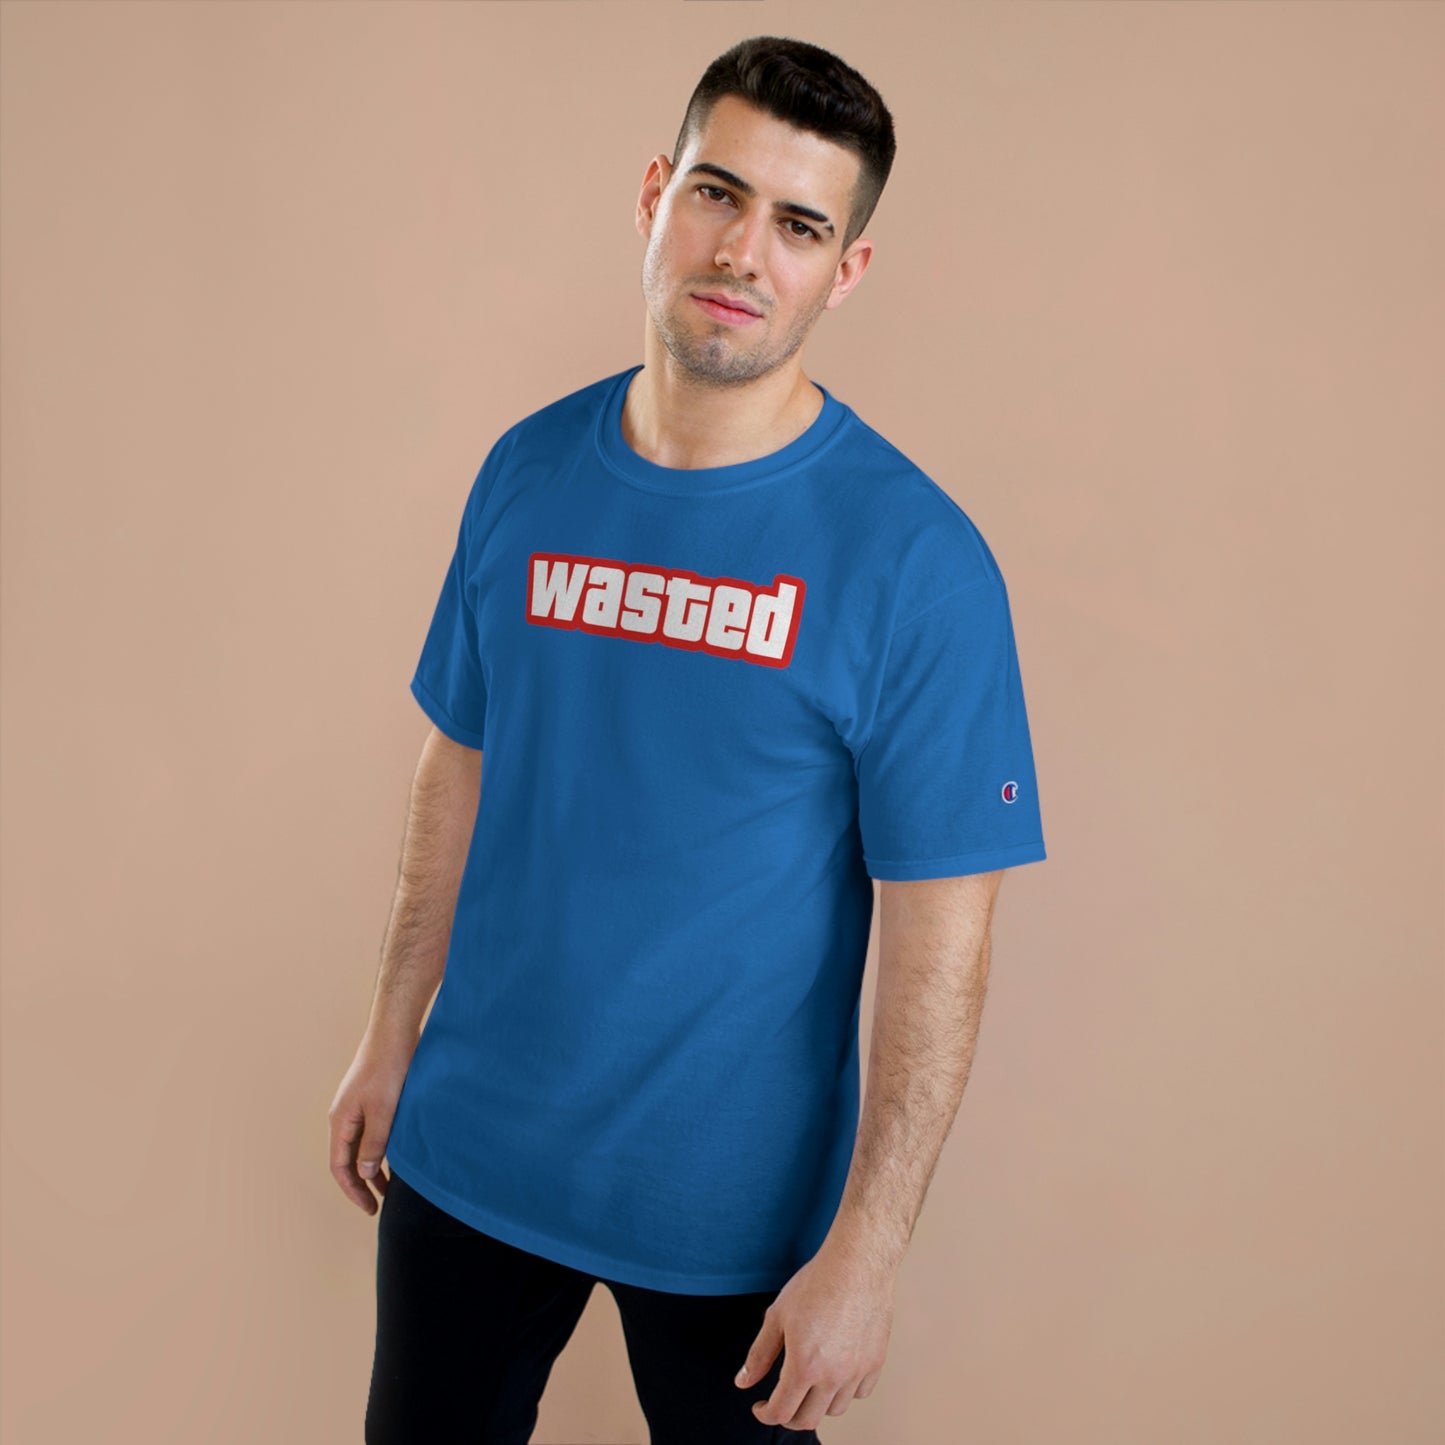 Atziluth Gallery x Champion "Wasted" T-Shirt